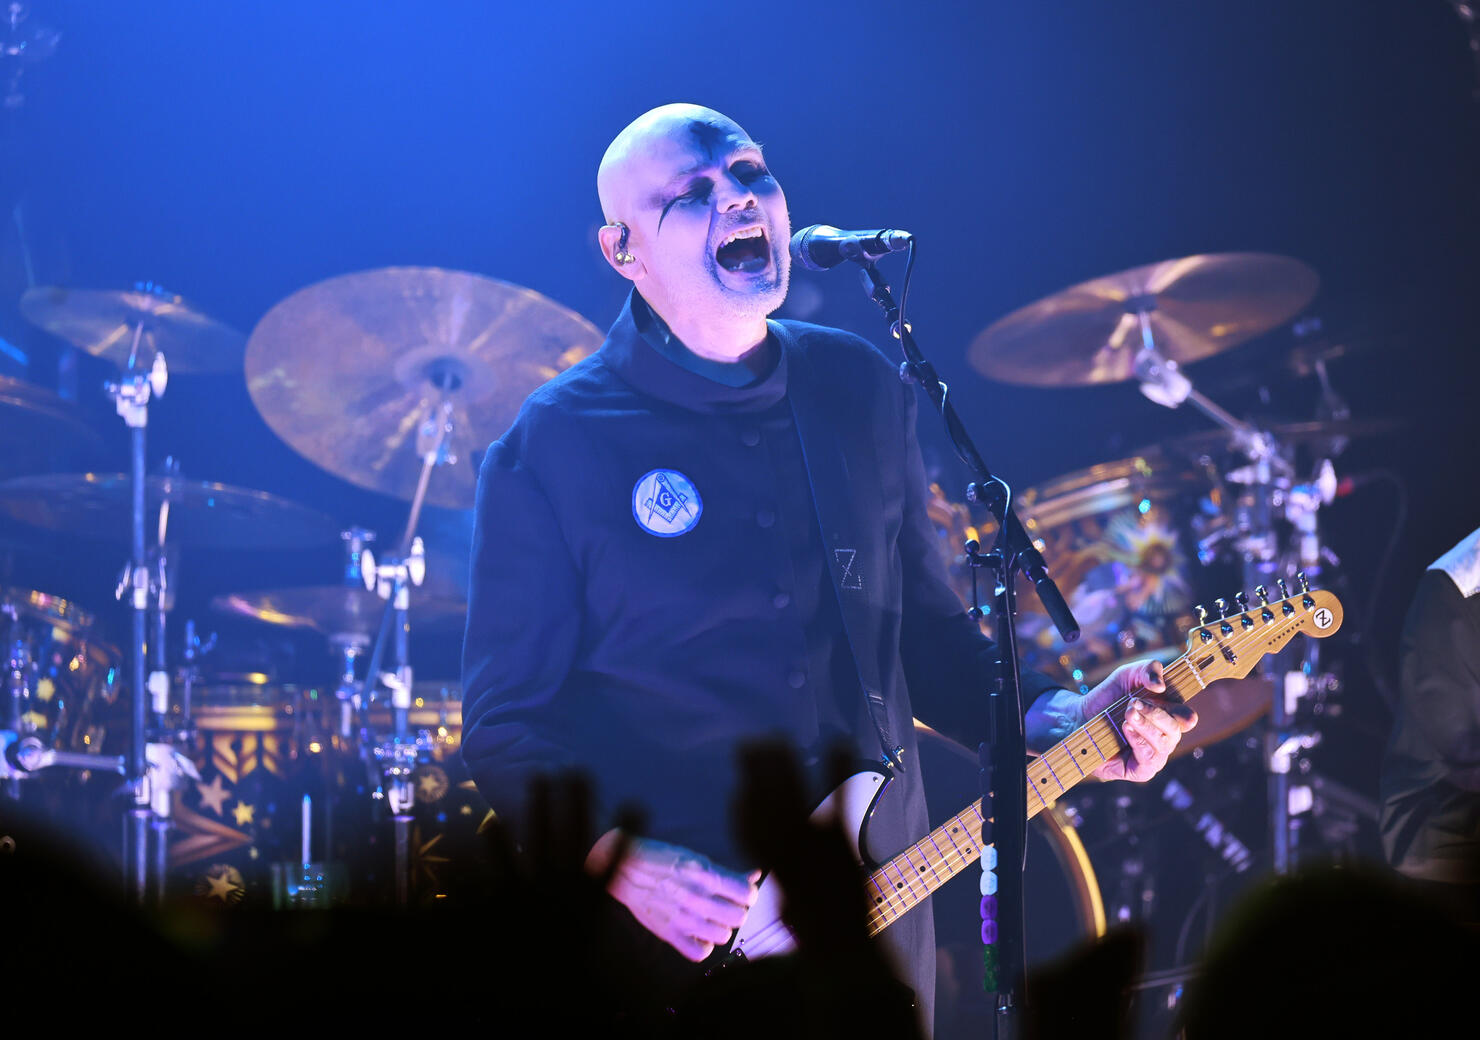 The Smashing Pumpkins In Concert - New York, NY